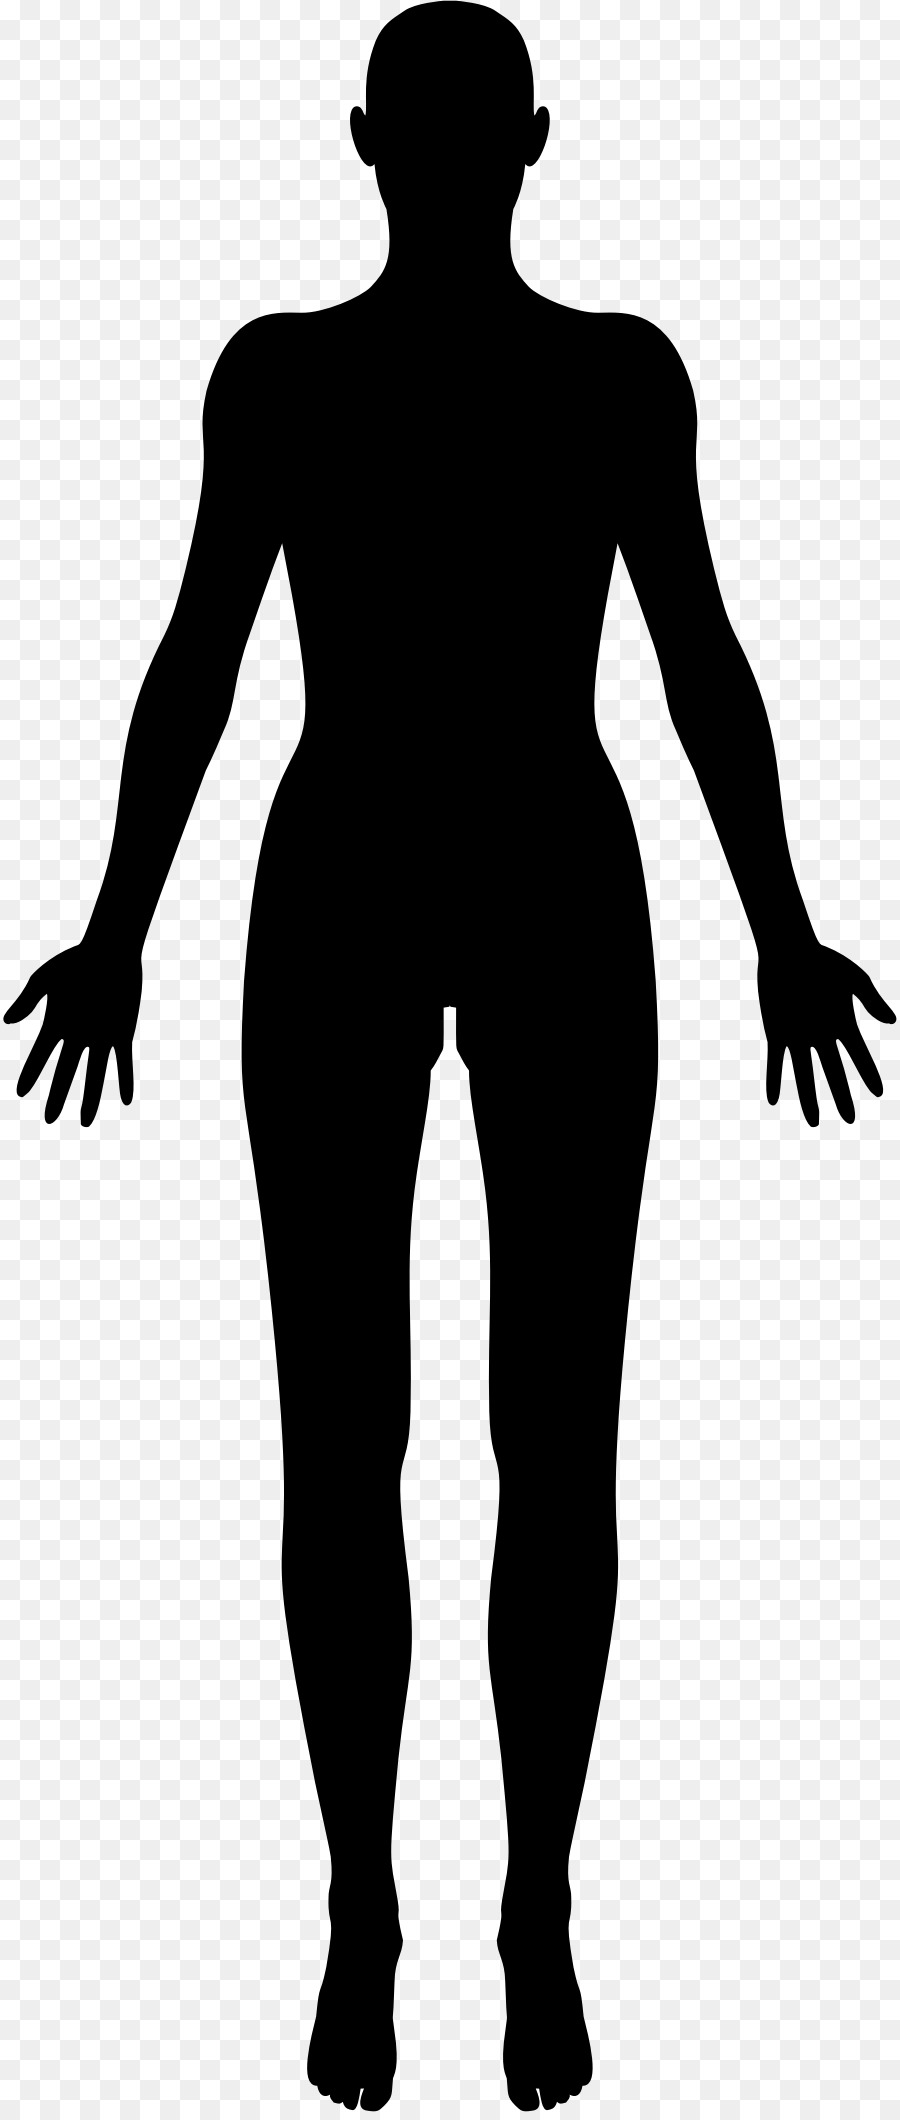 Body Silhouette Stock Illustrations, Cliparts and Royalty Free